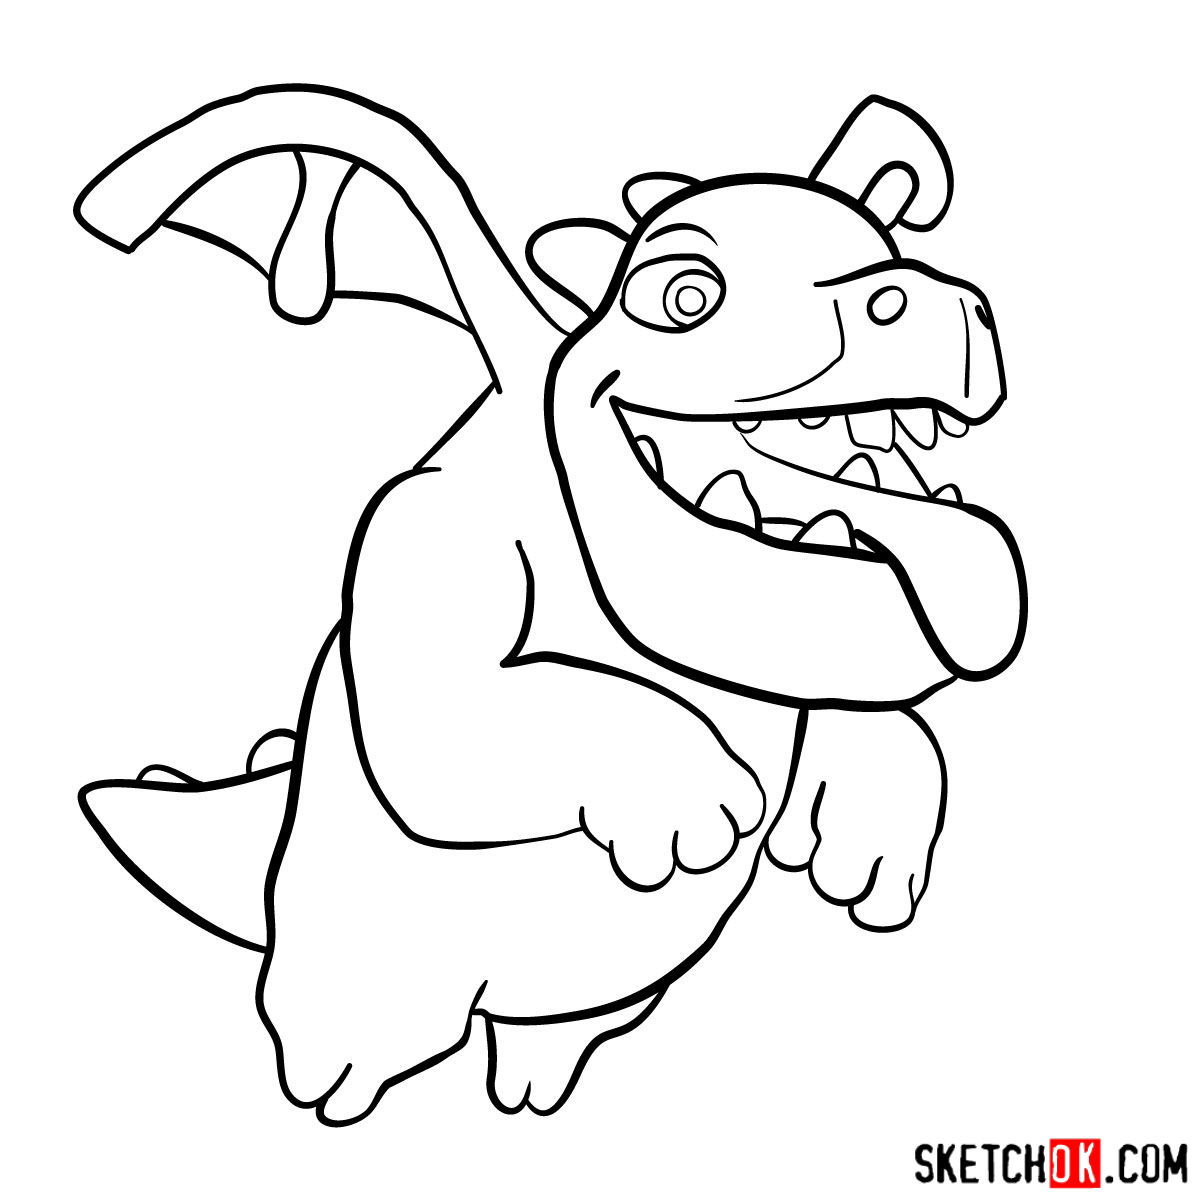 How to draw Baby Dragon from Clash of Clans - step 09